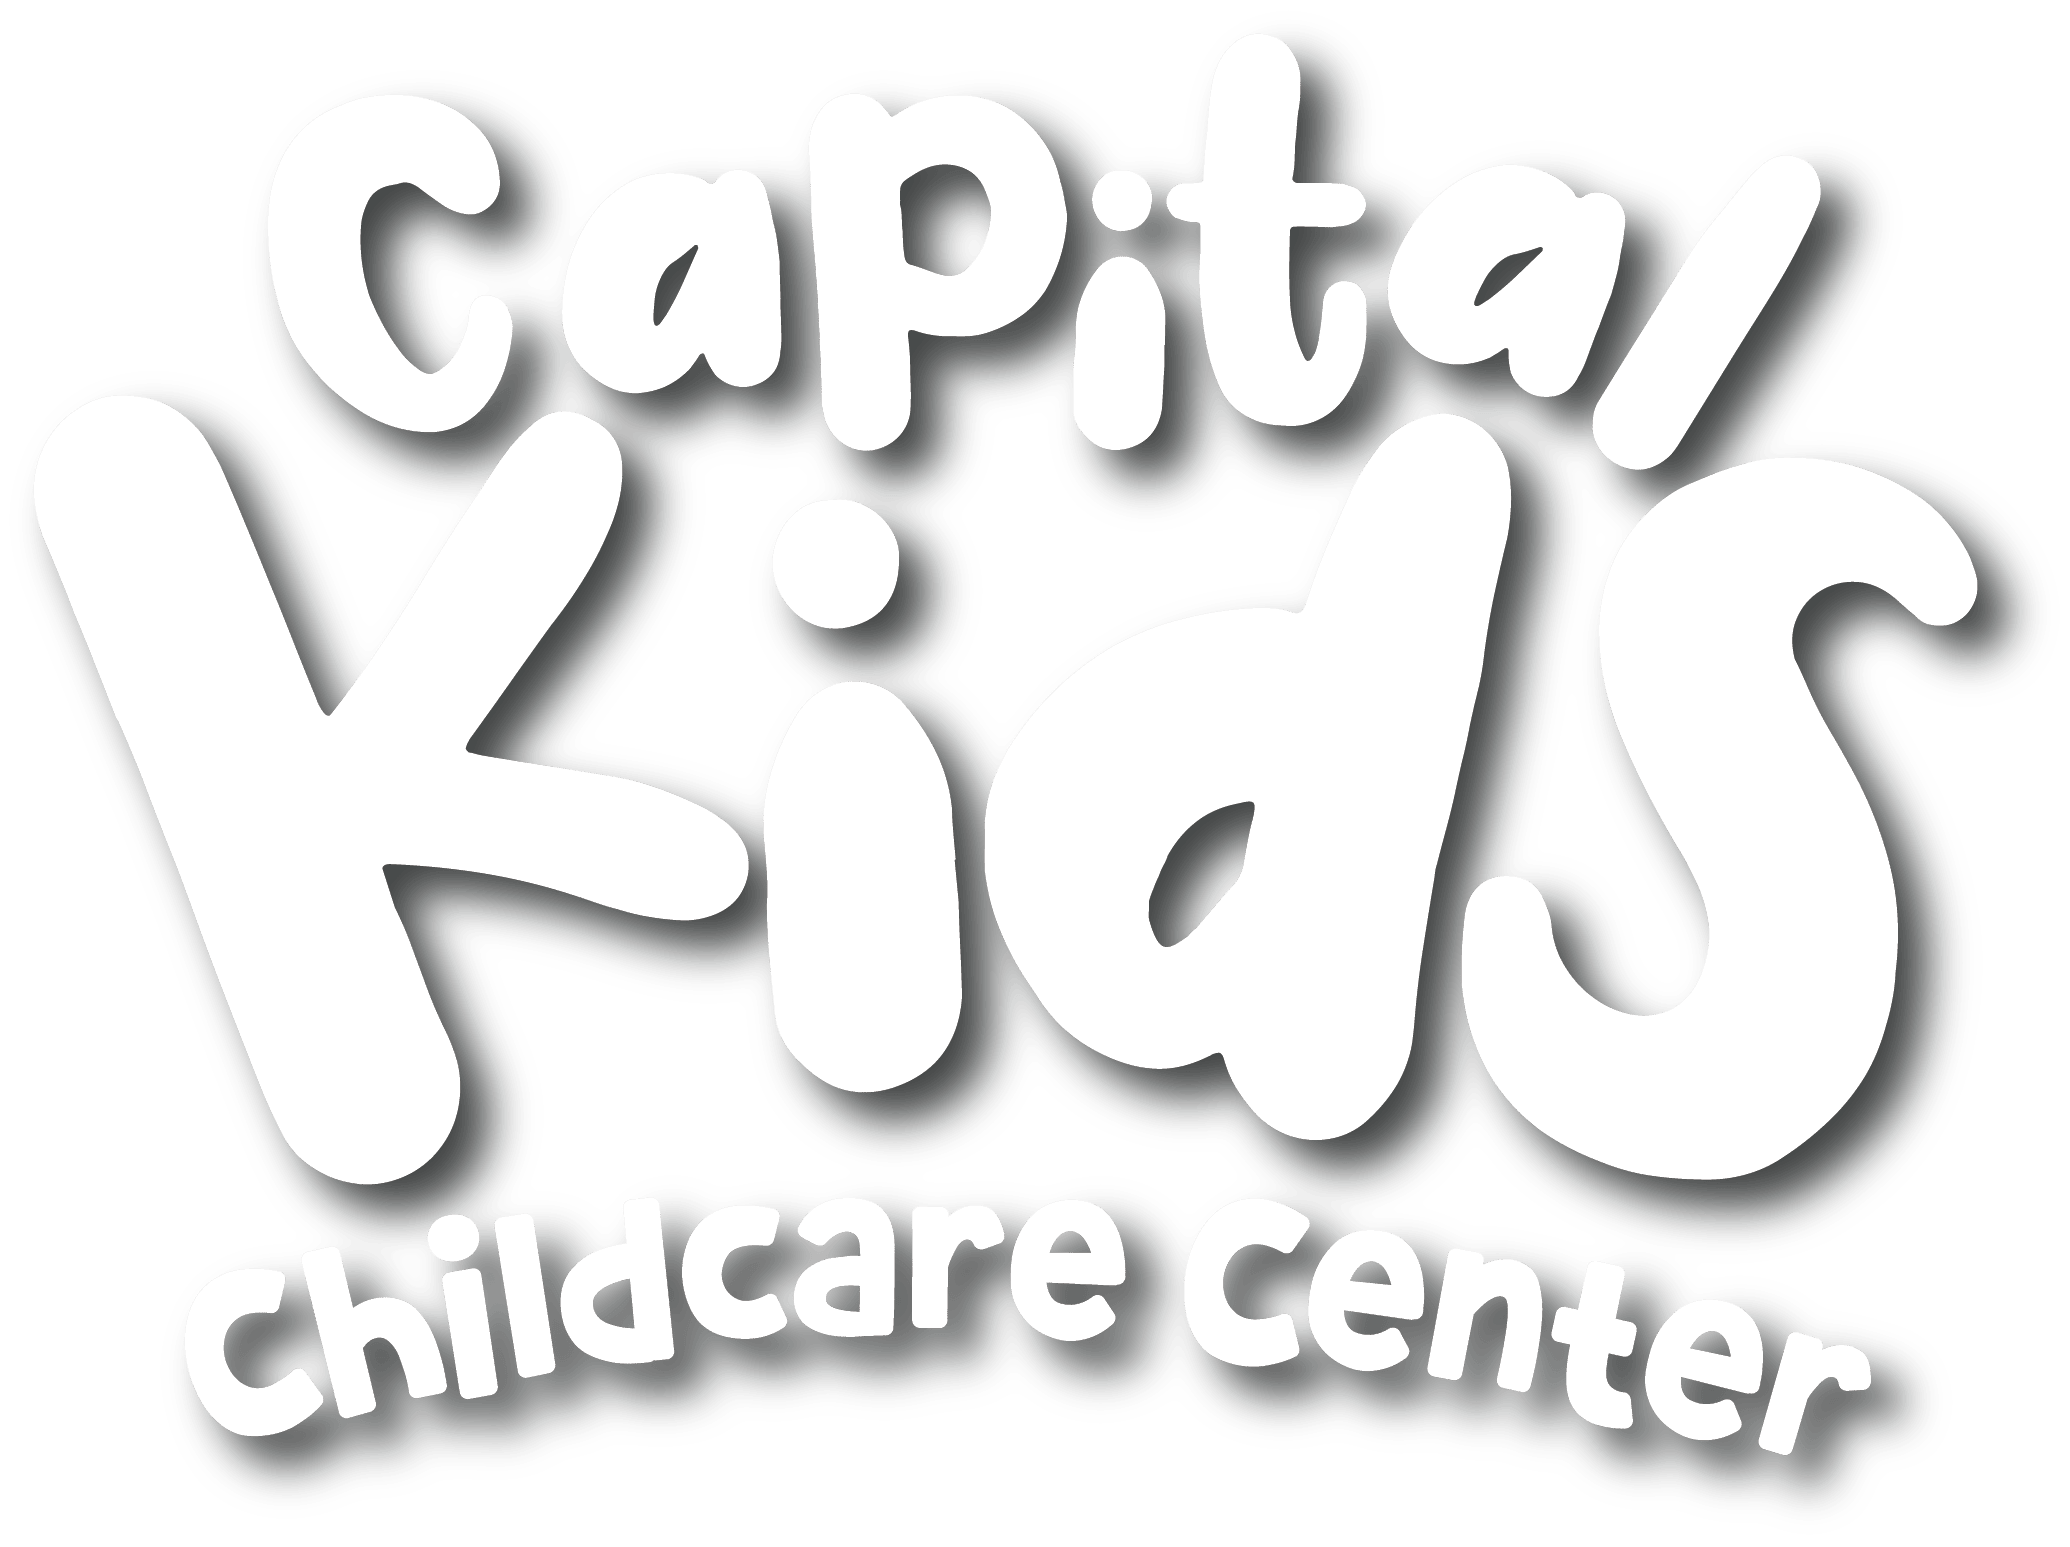 About Us – Capital Kids Care